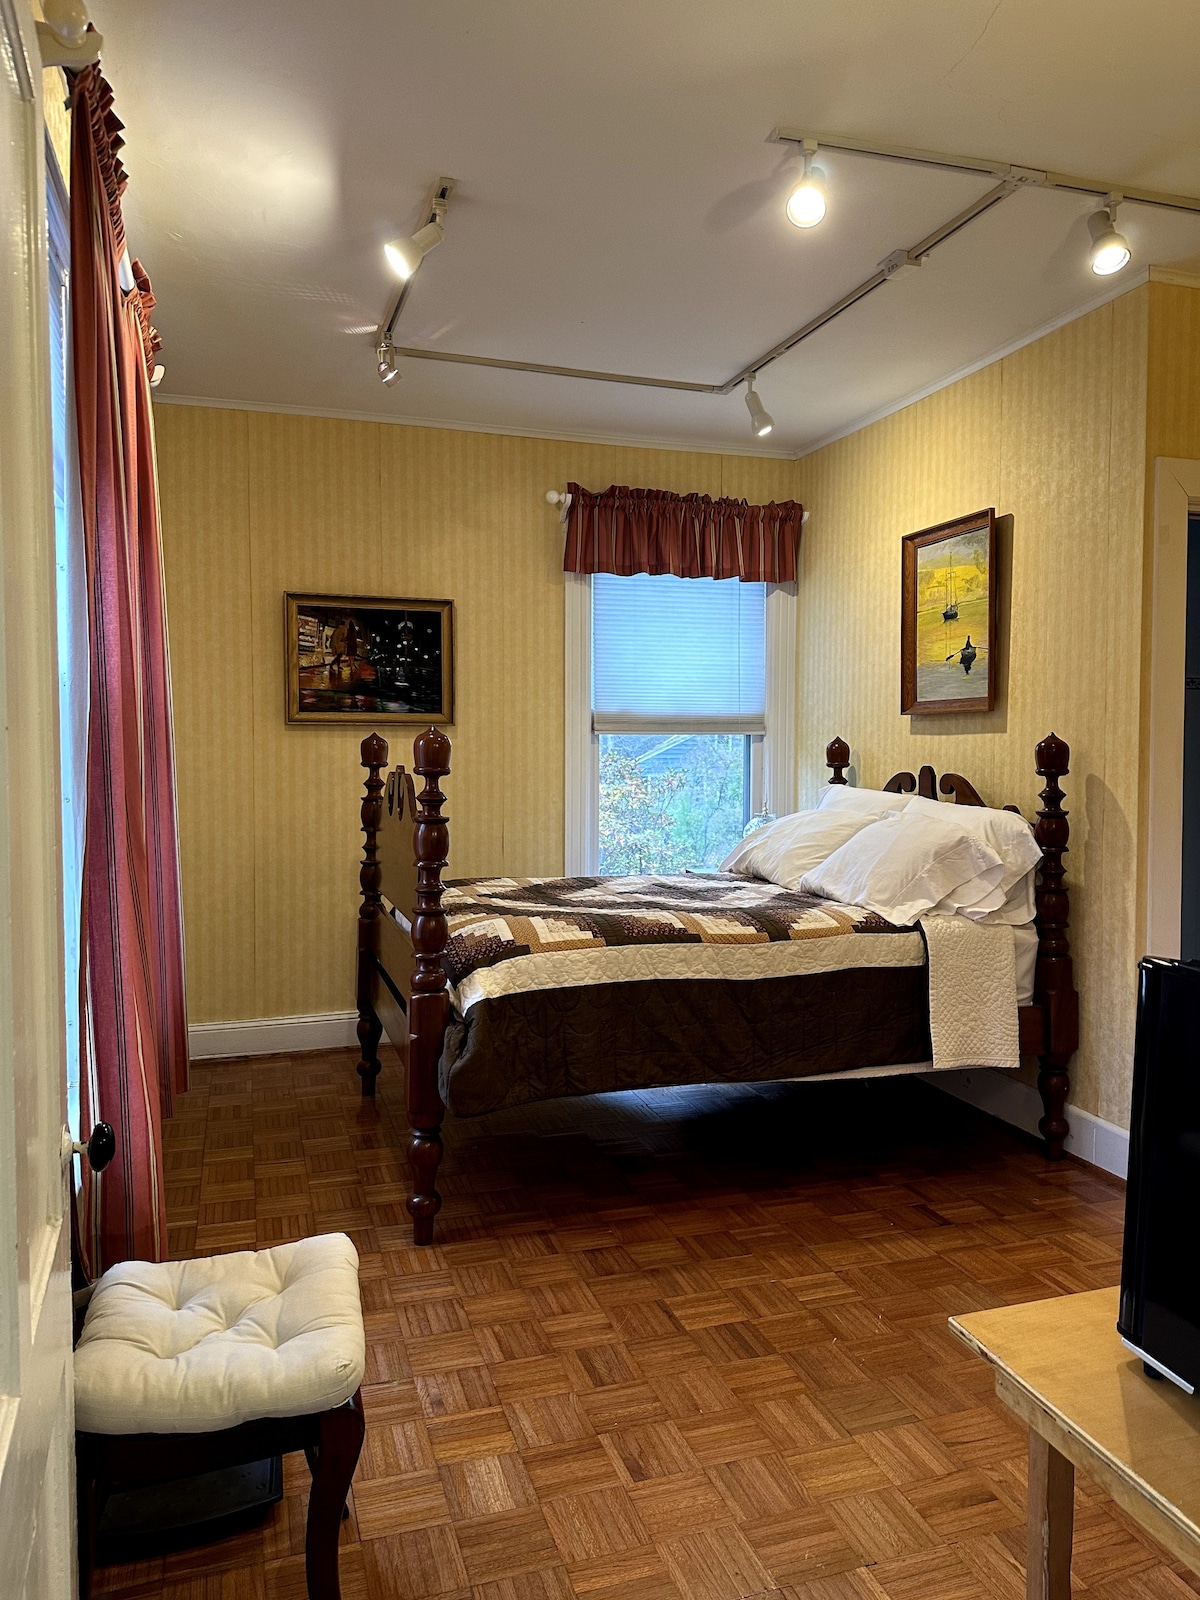 Cozy room with private bath, close to Kripalu